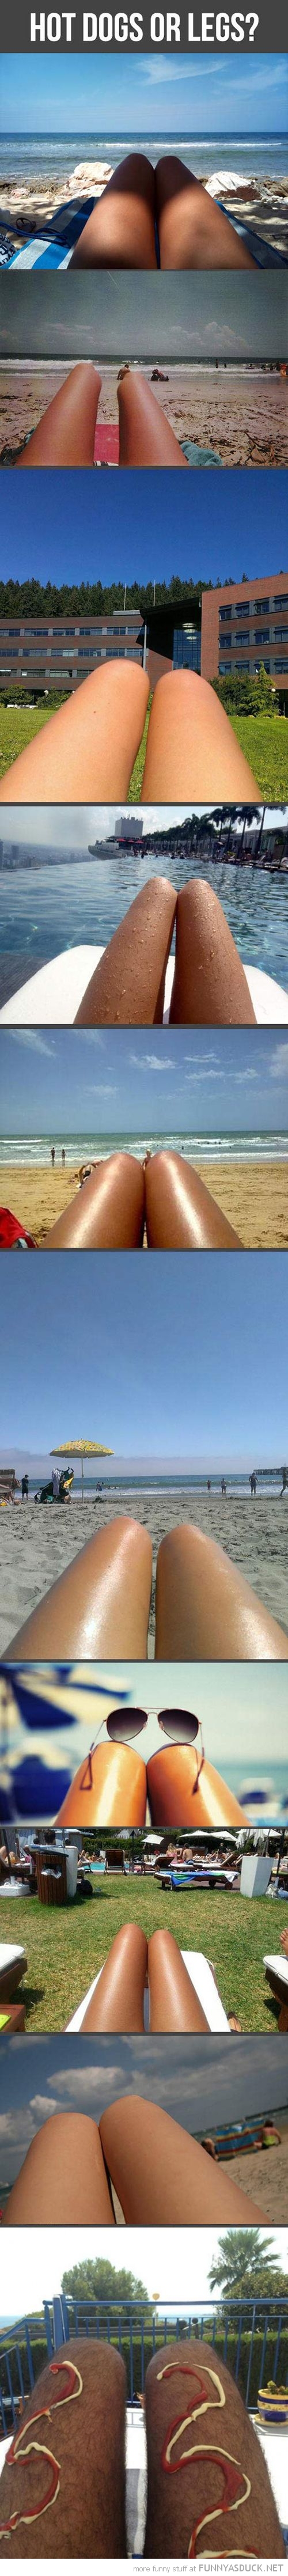 funny-hot-dogs-or-legs-pics.jpg